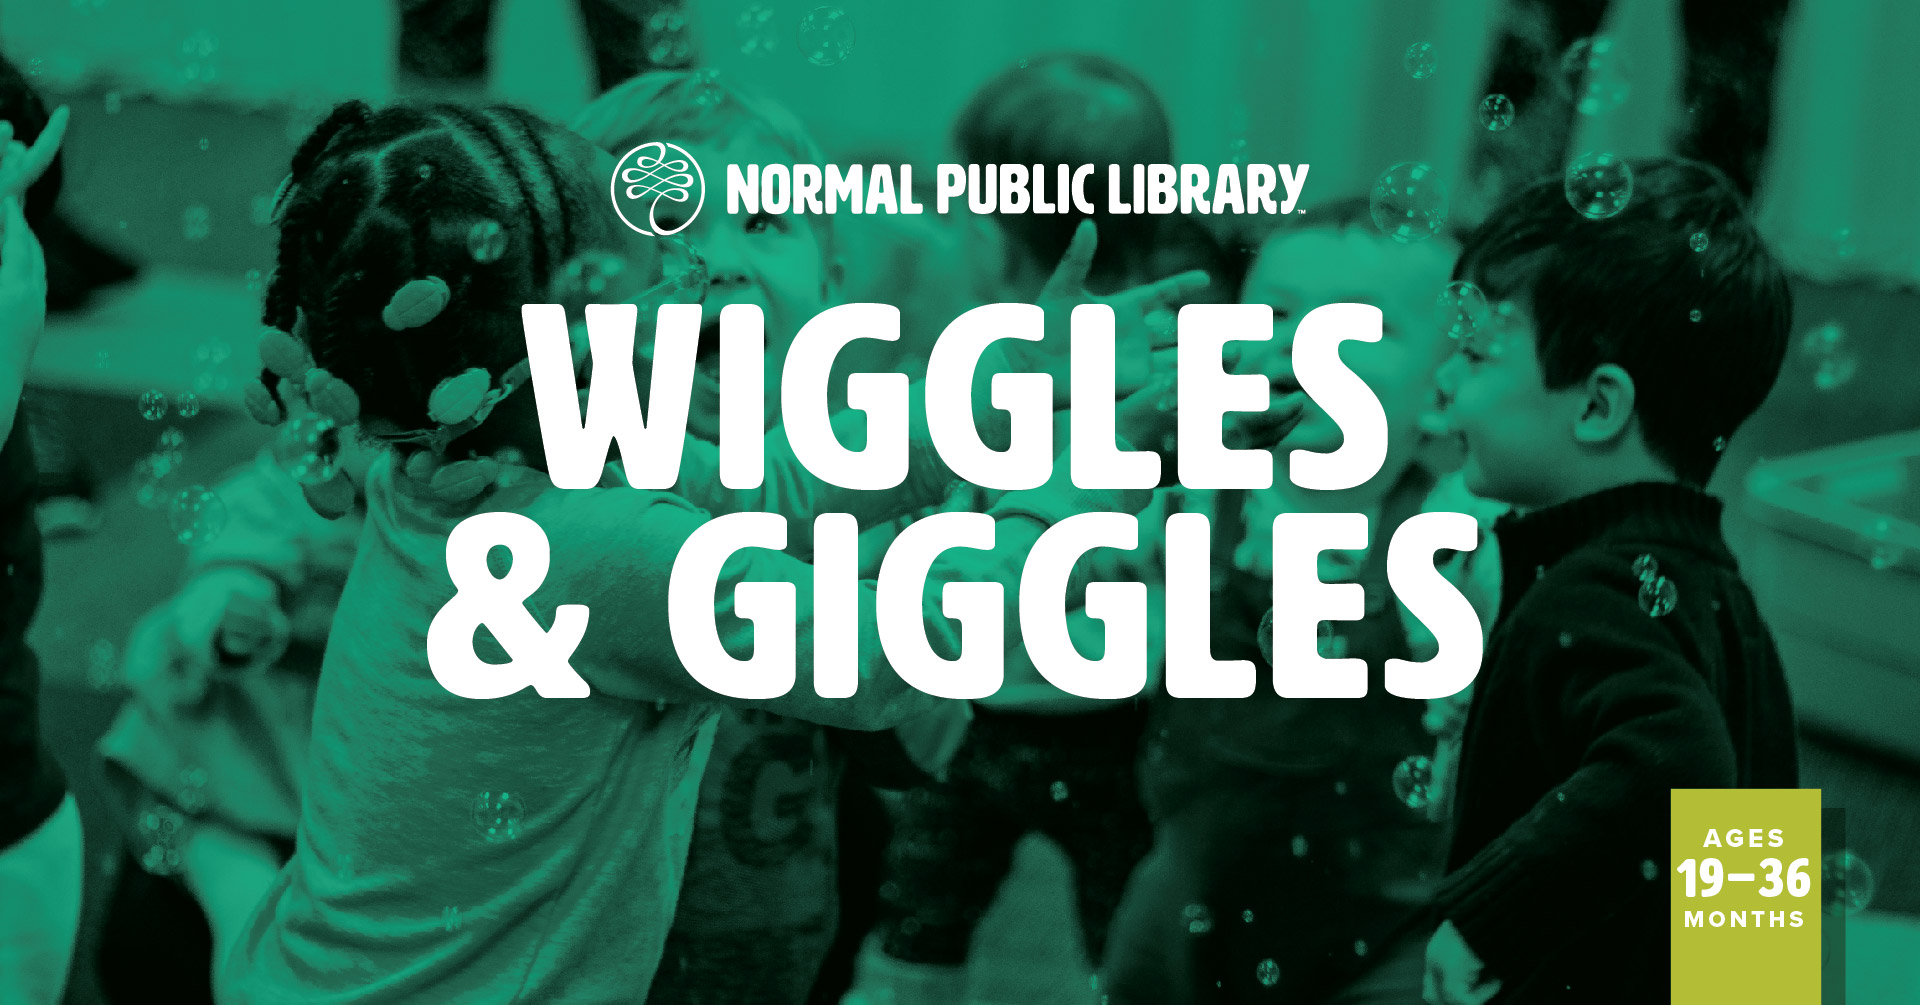 Image for Wiggles & Giggles.